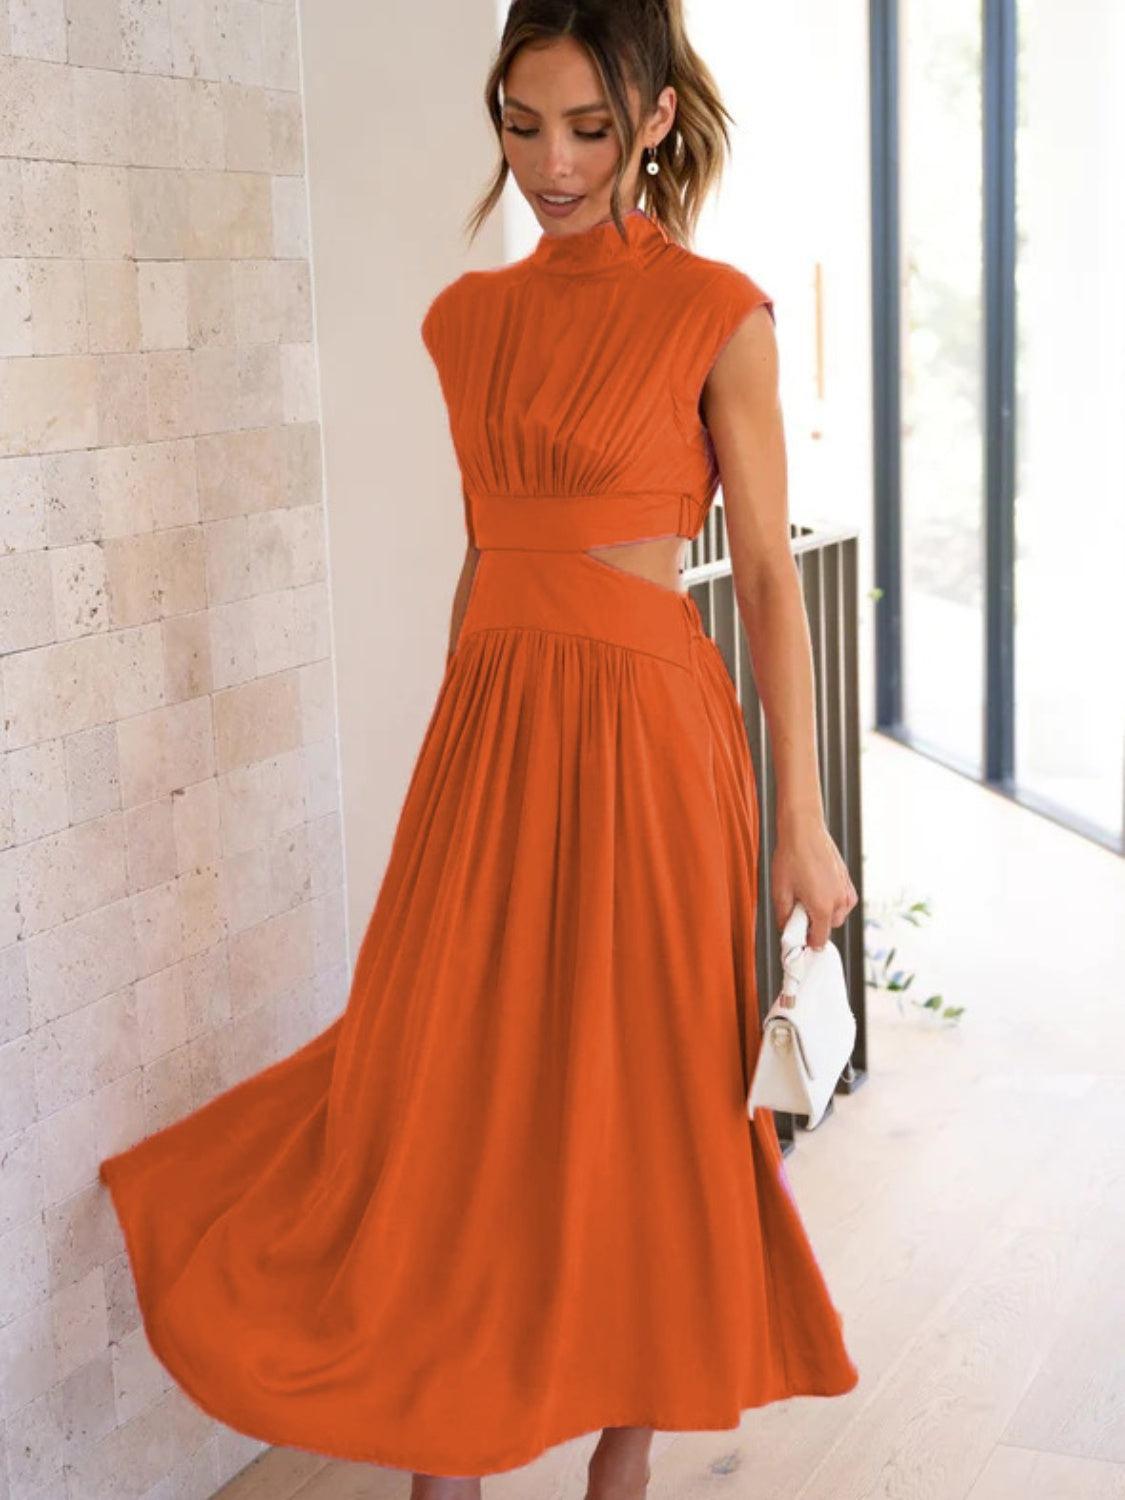 a woman in an orange dress is holding a purse